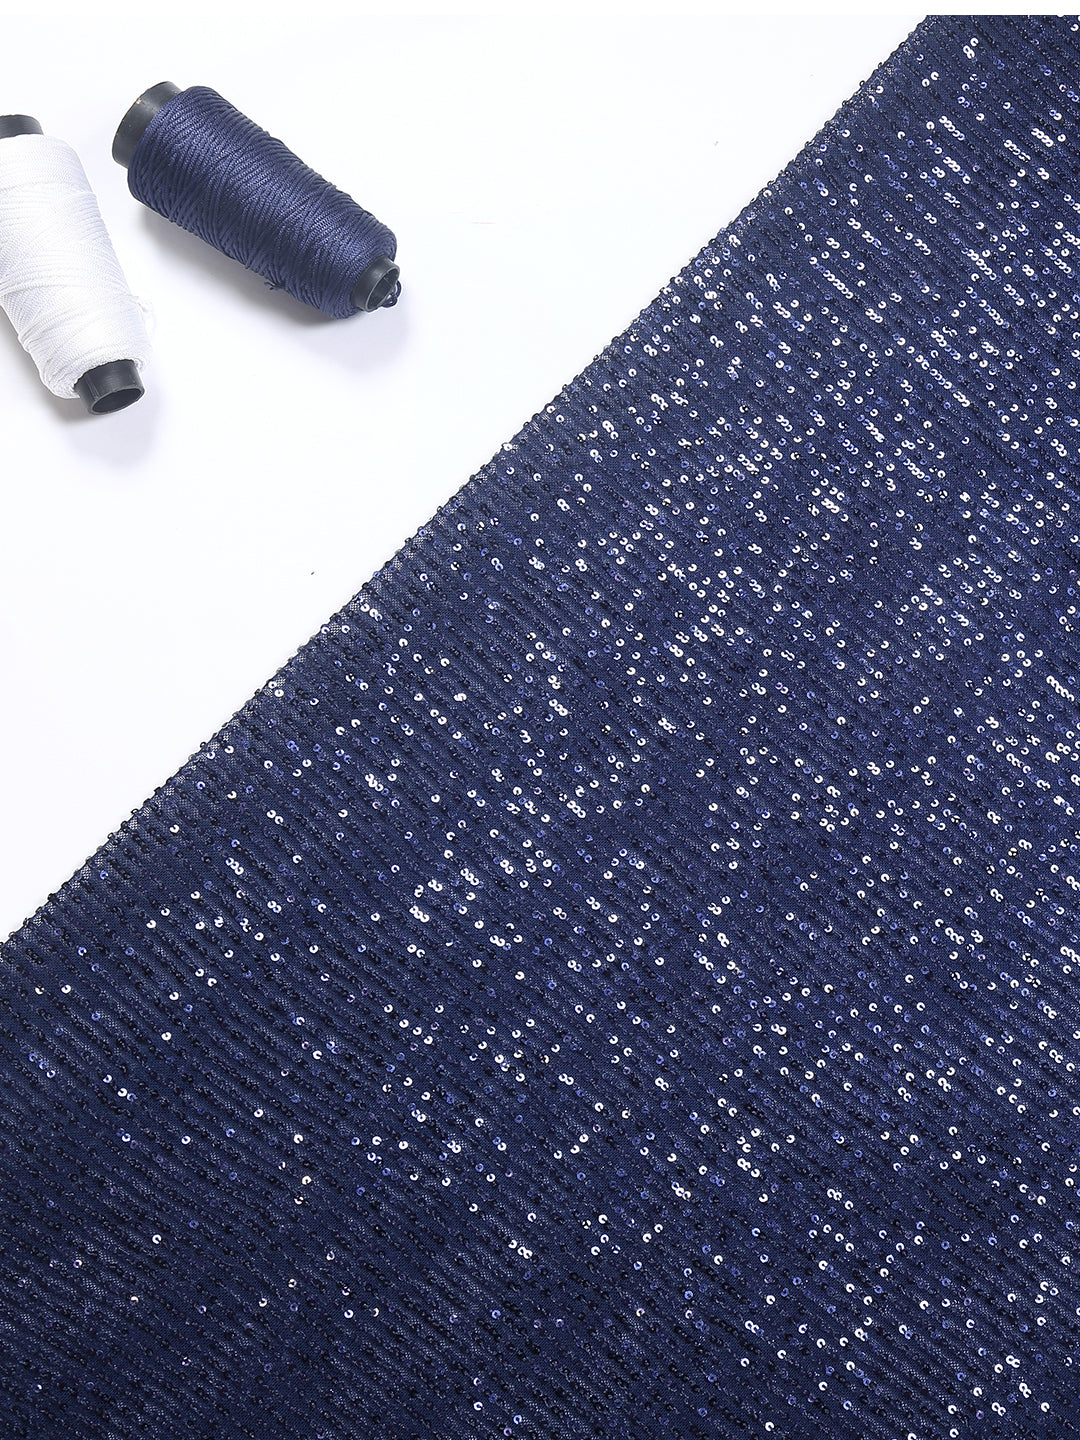 Navy Blue Stretchable Net Fabric With Sequin